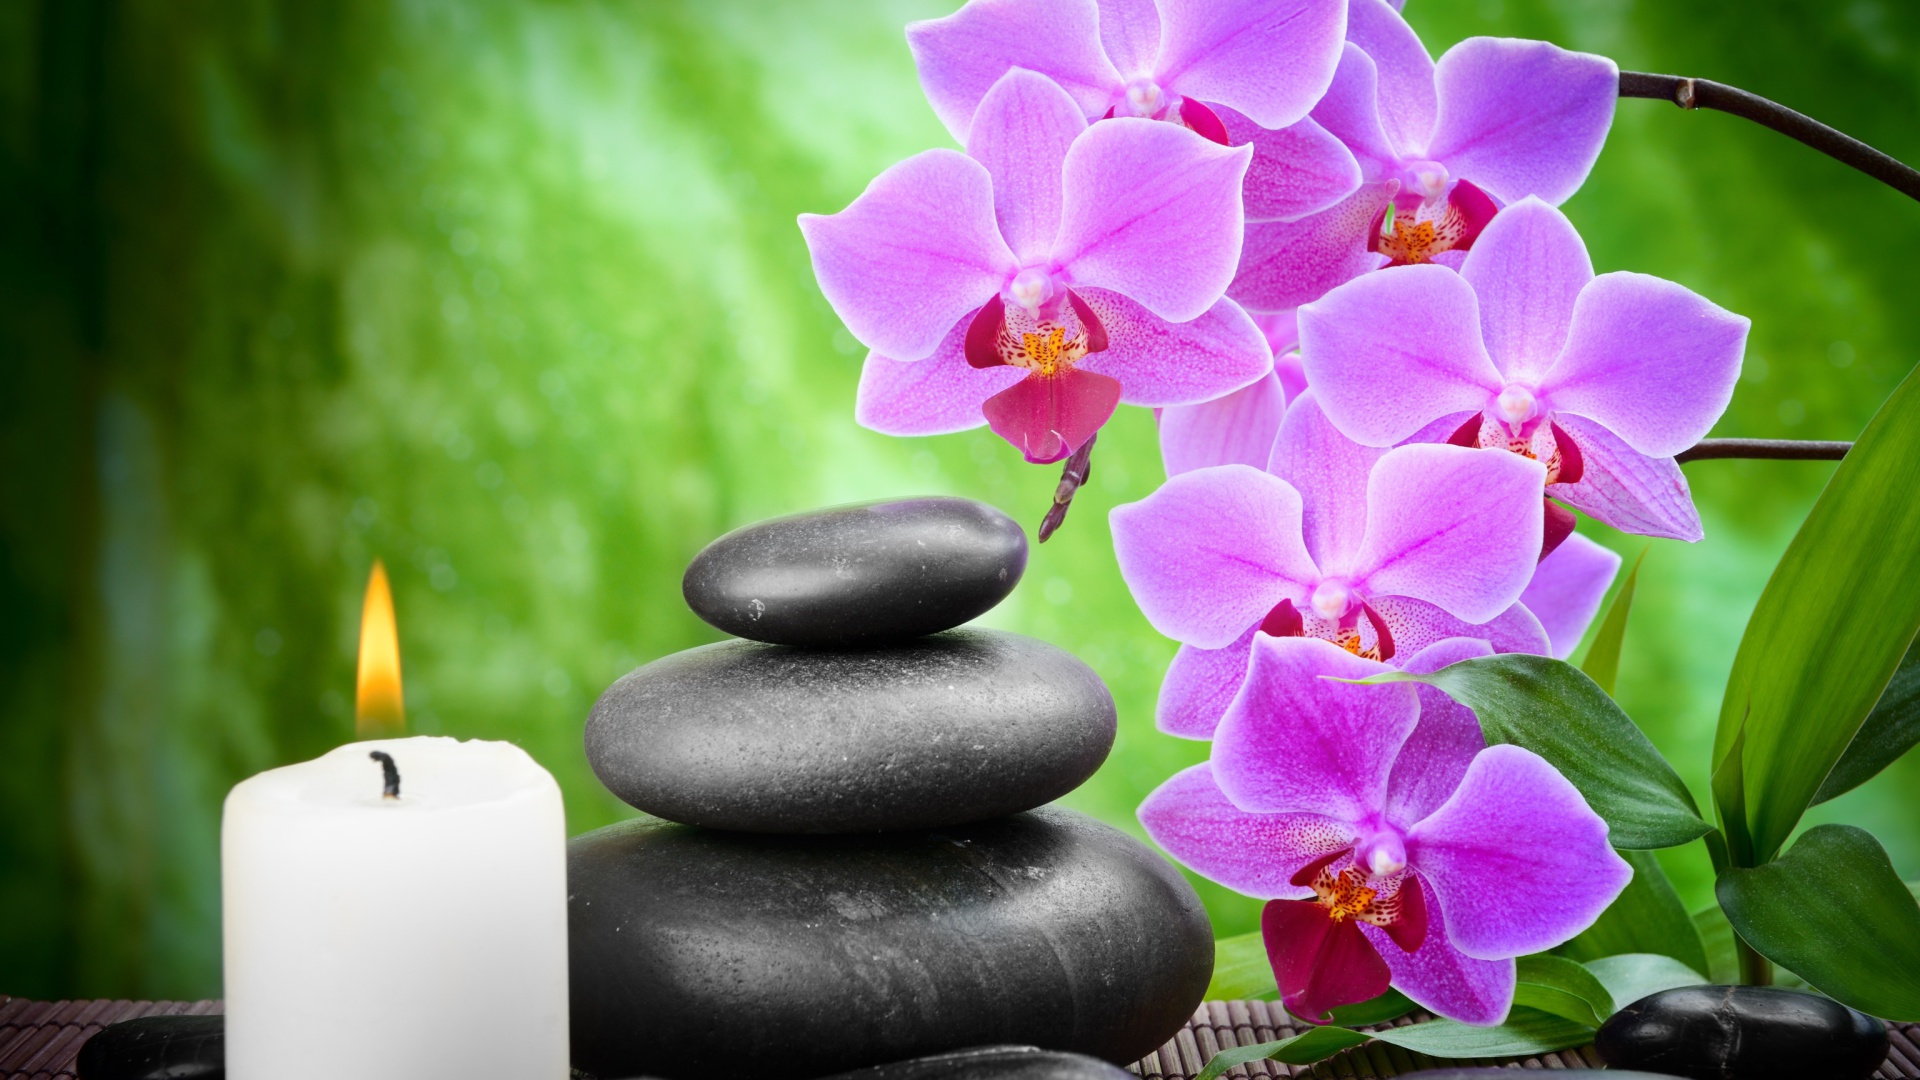 Pebbles, candles and orchids Wallpaper for 1920x1080